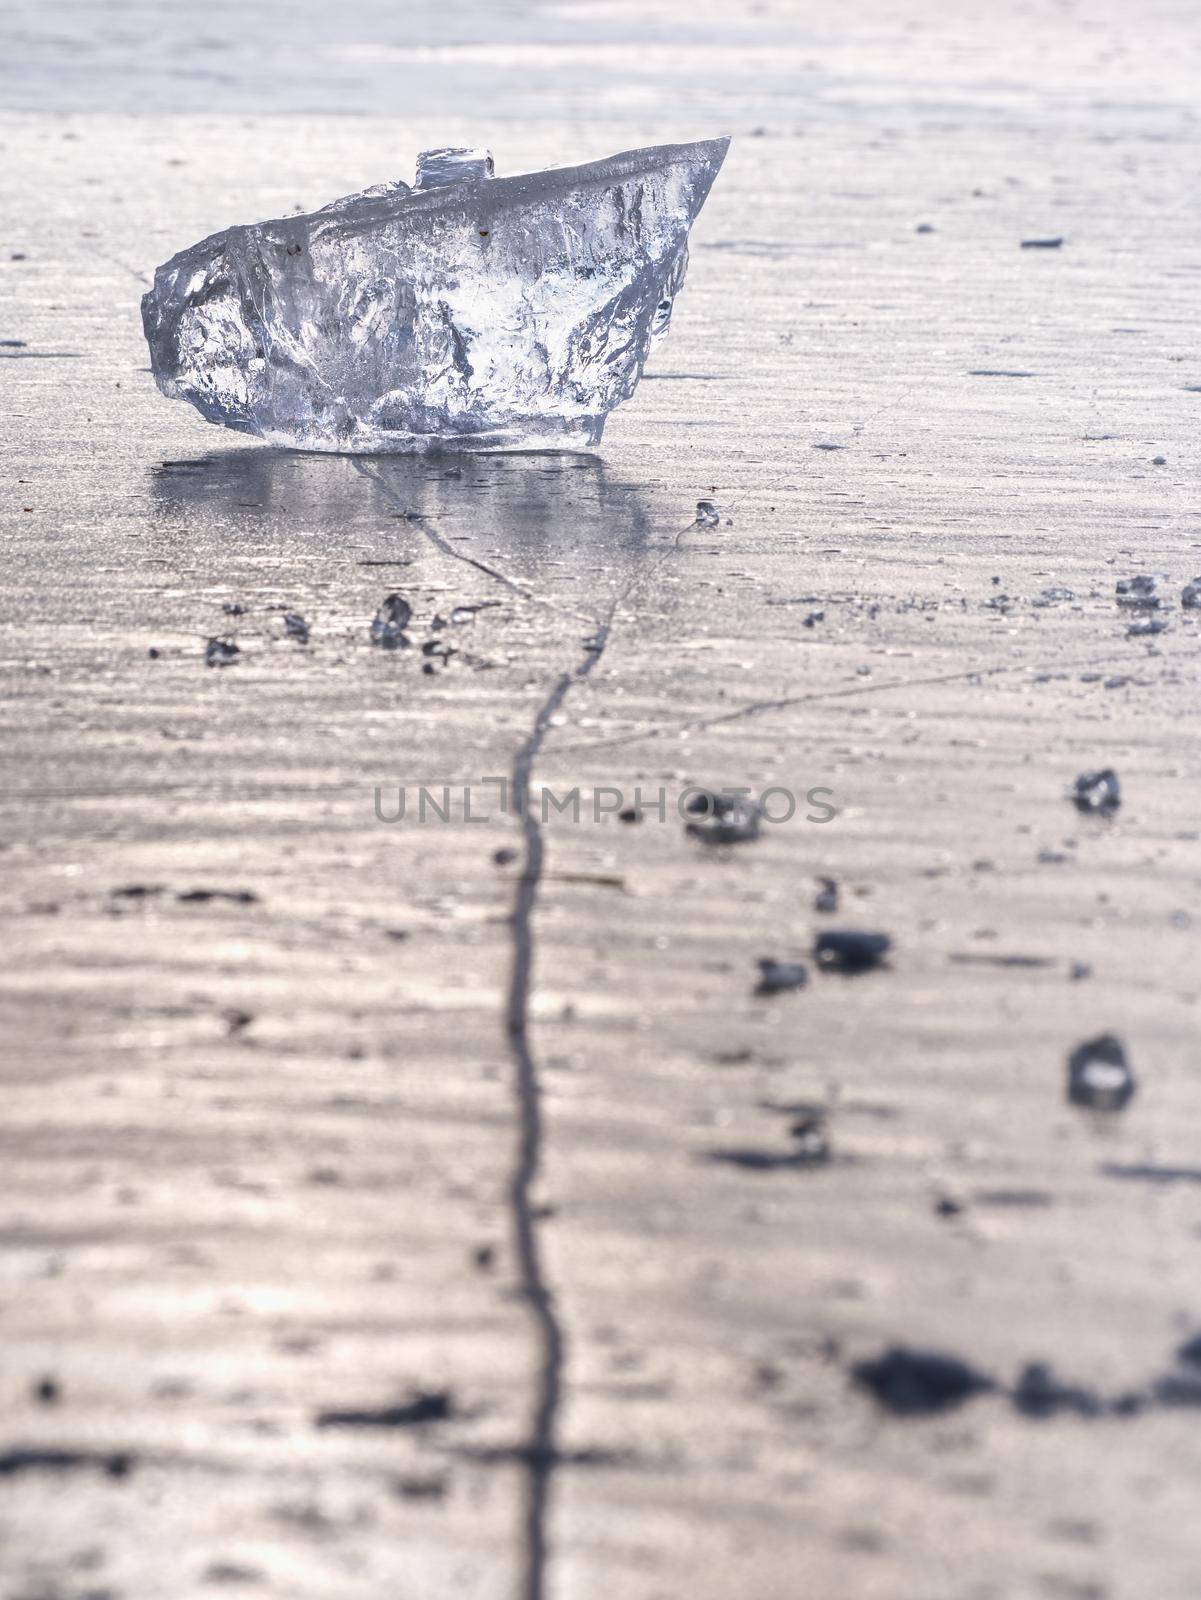 sparkling shards of cracked ice jut out on the frozen lake. The light effect occurs in deep and shallow cracks of sublime ice. Follow the depth of field